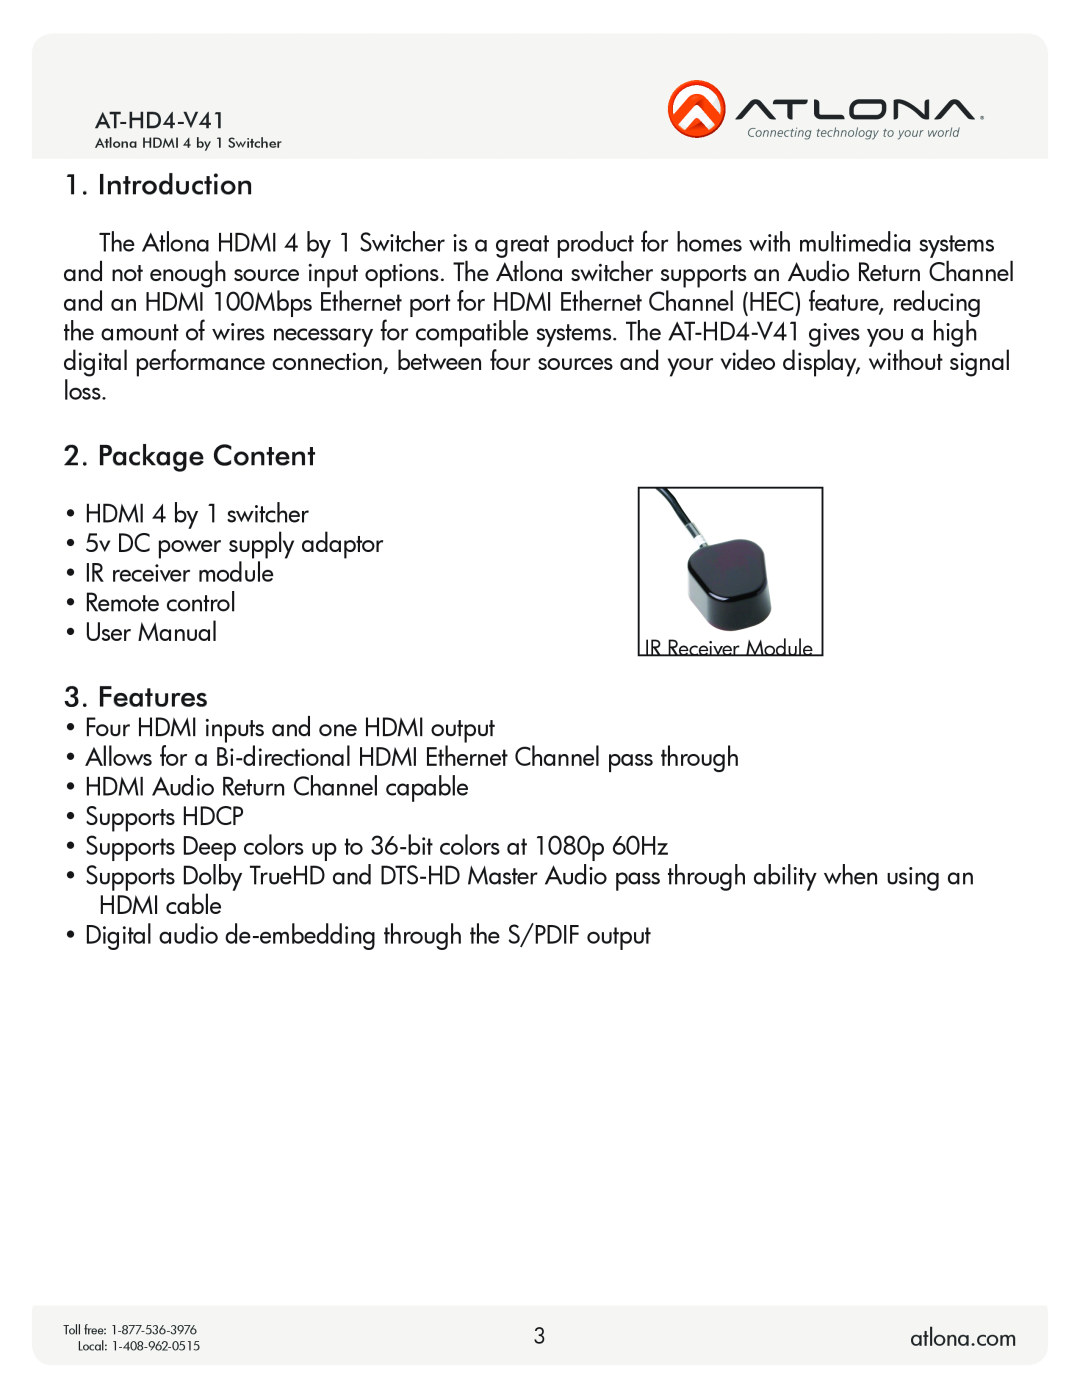 Atlona AT-HD4-V41 user manual Introduction, Package Content, Features 